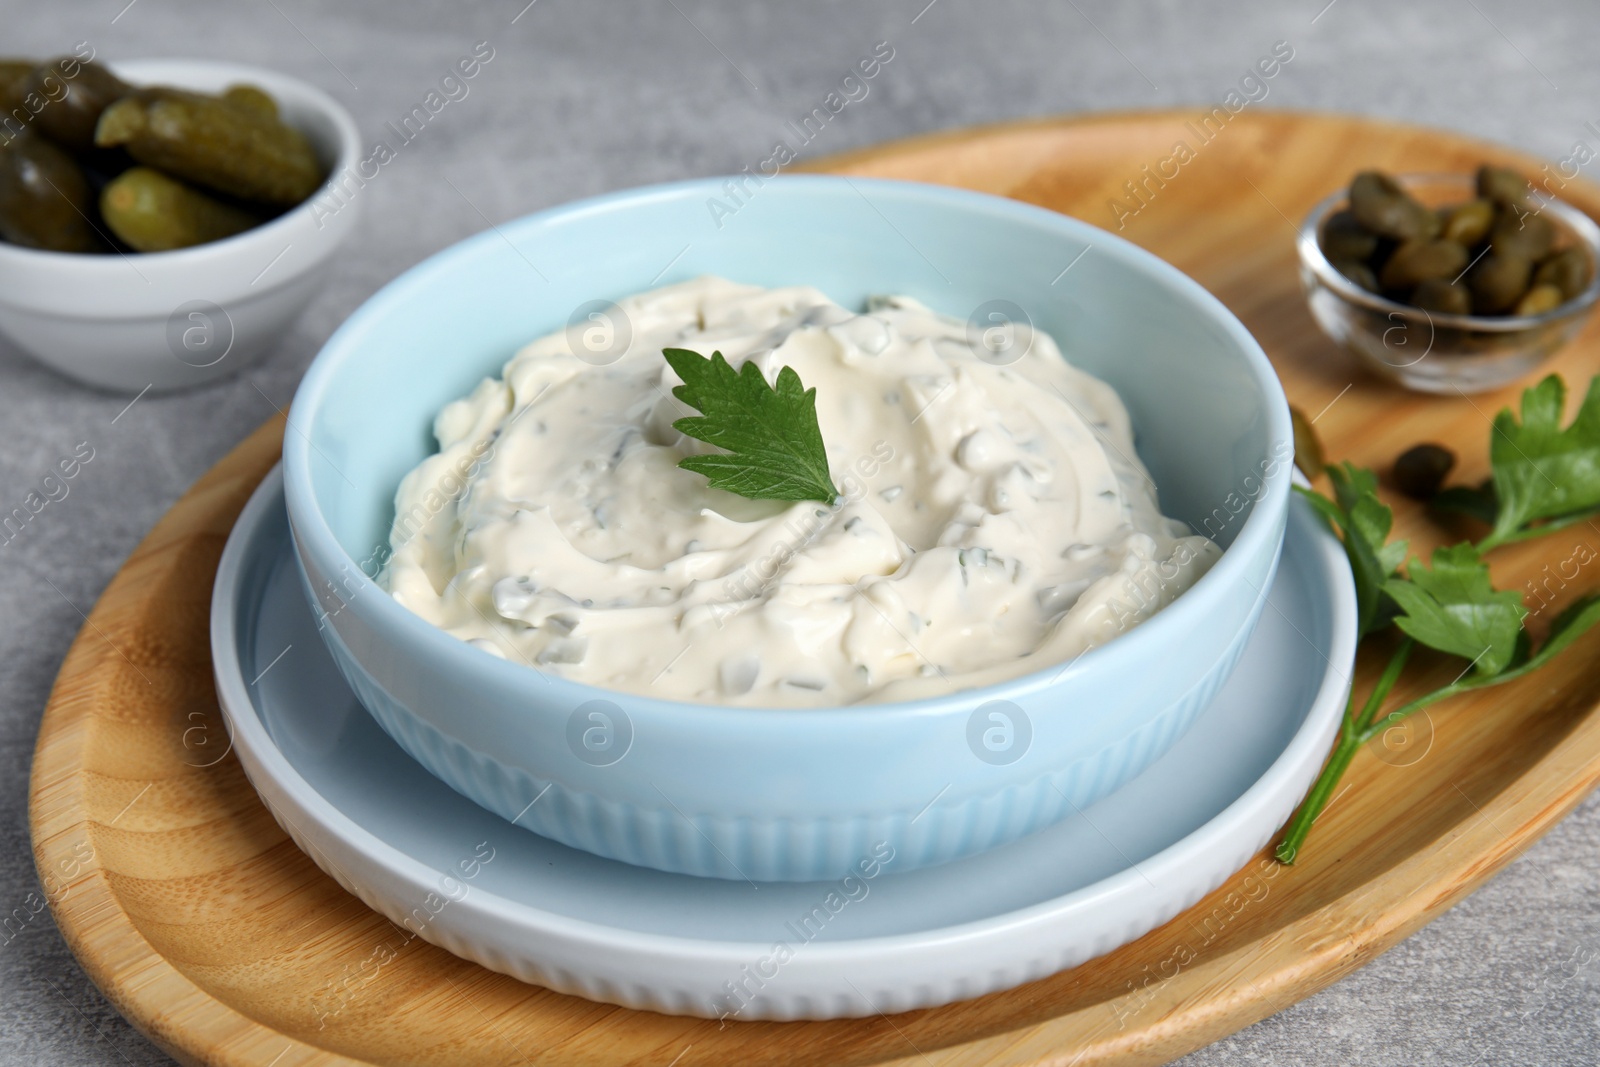 Photo of Tasty tartar sauce and ingredients on grey table, closeup